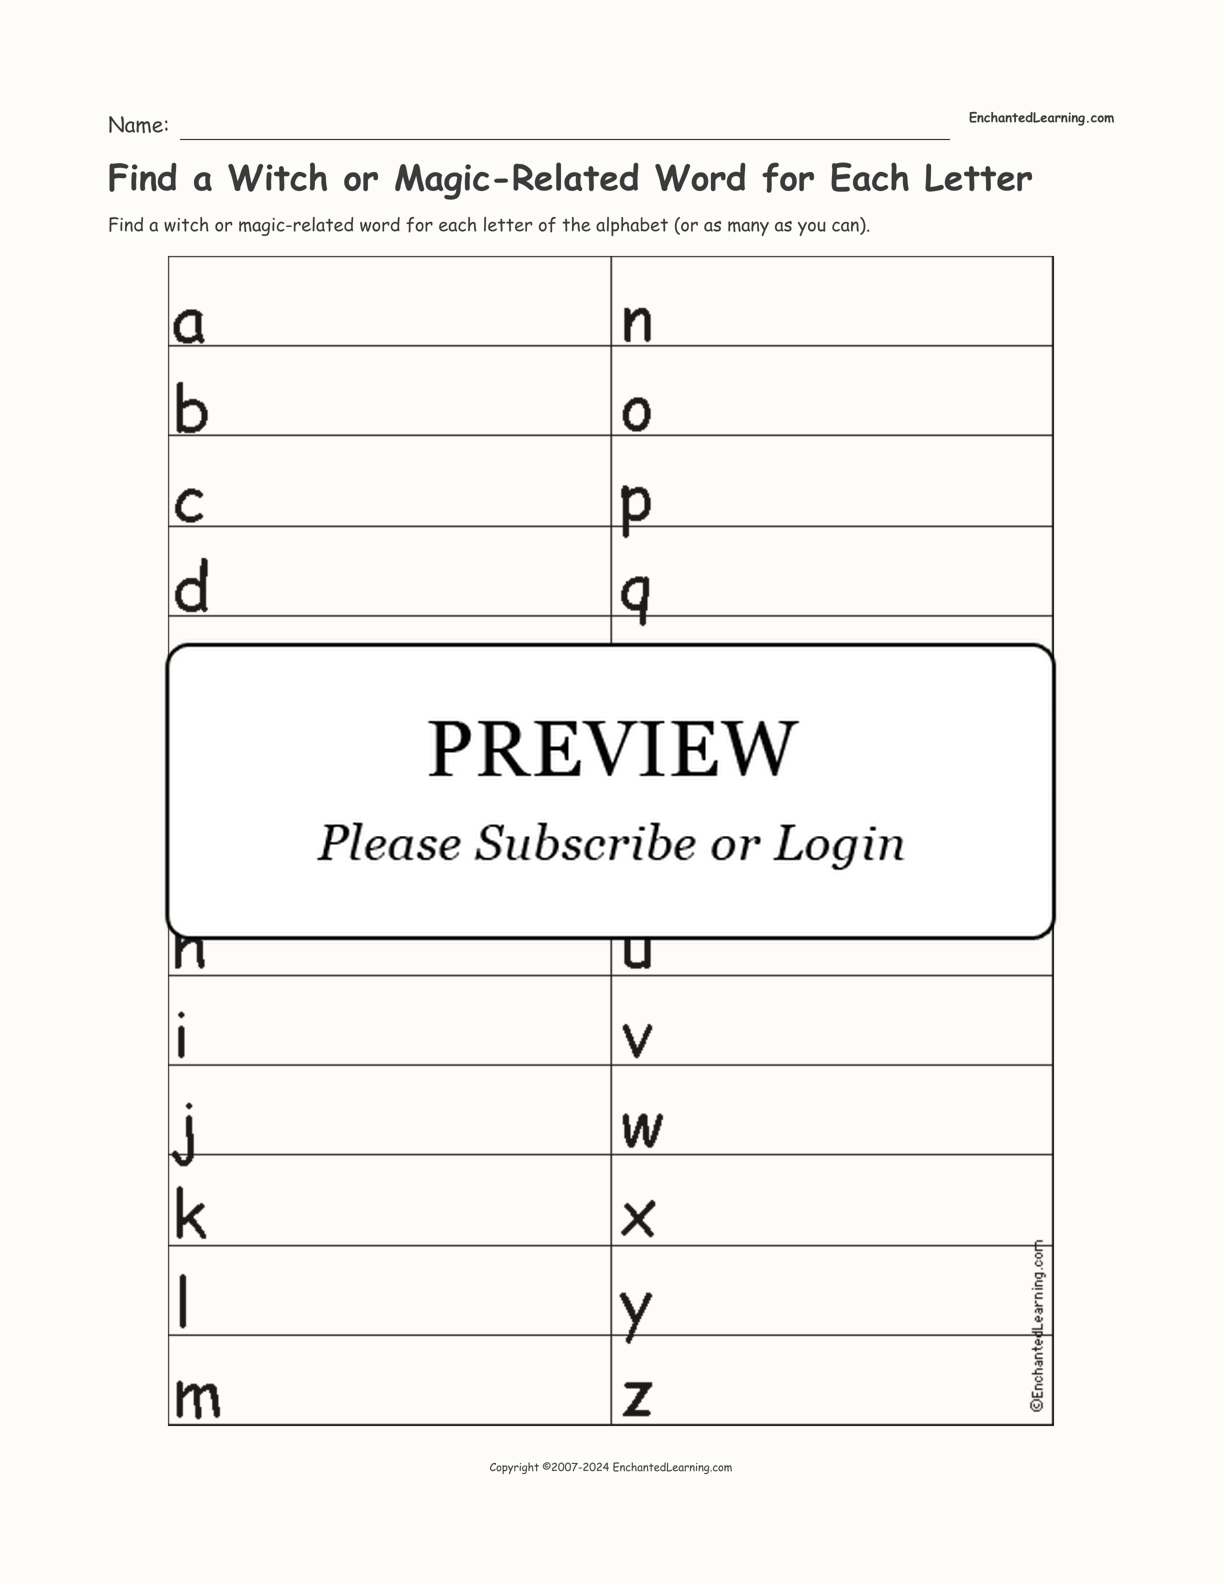 Find a Witch or Magic-Related Word for Each Letter interactive worksheet page 1